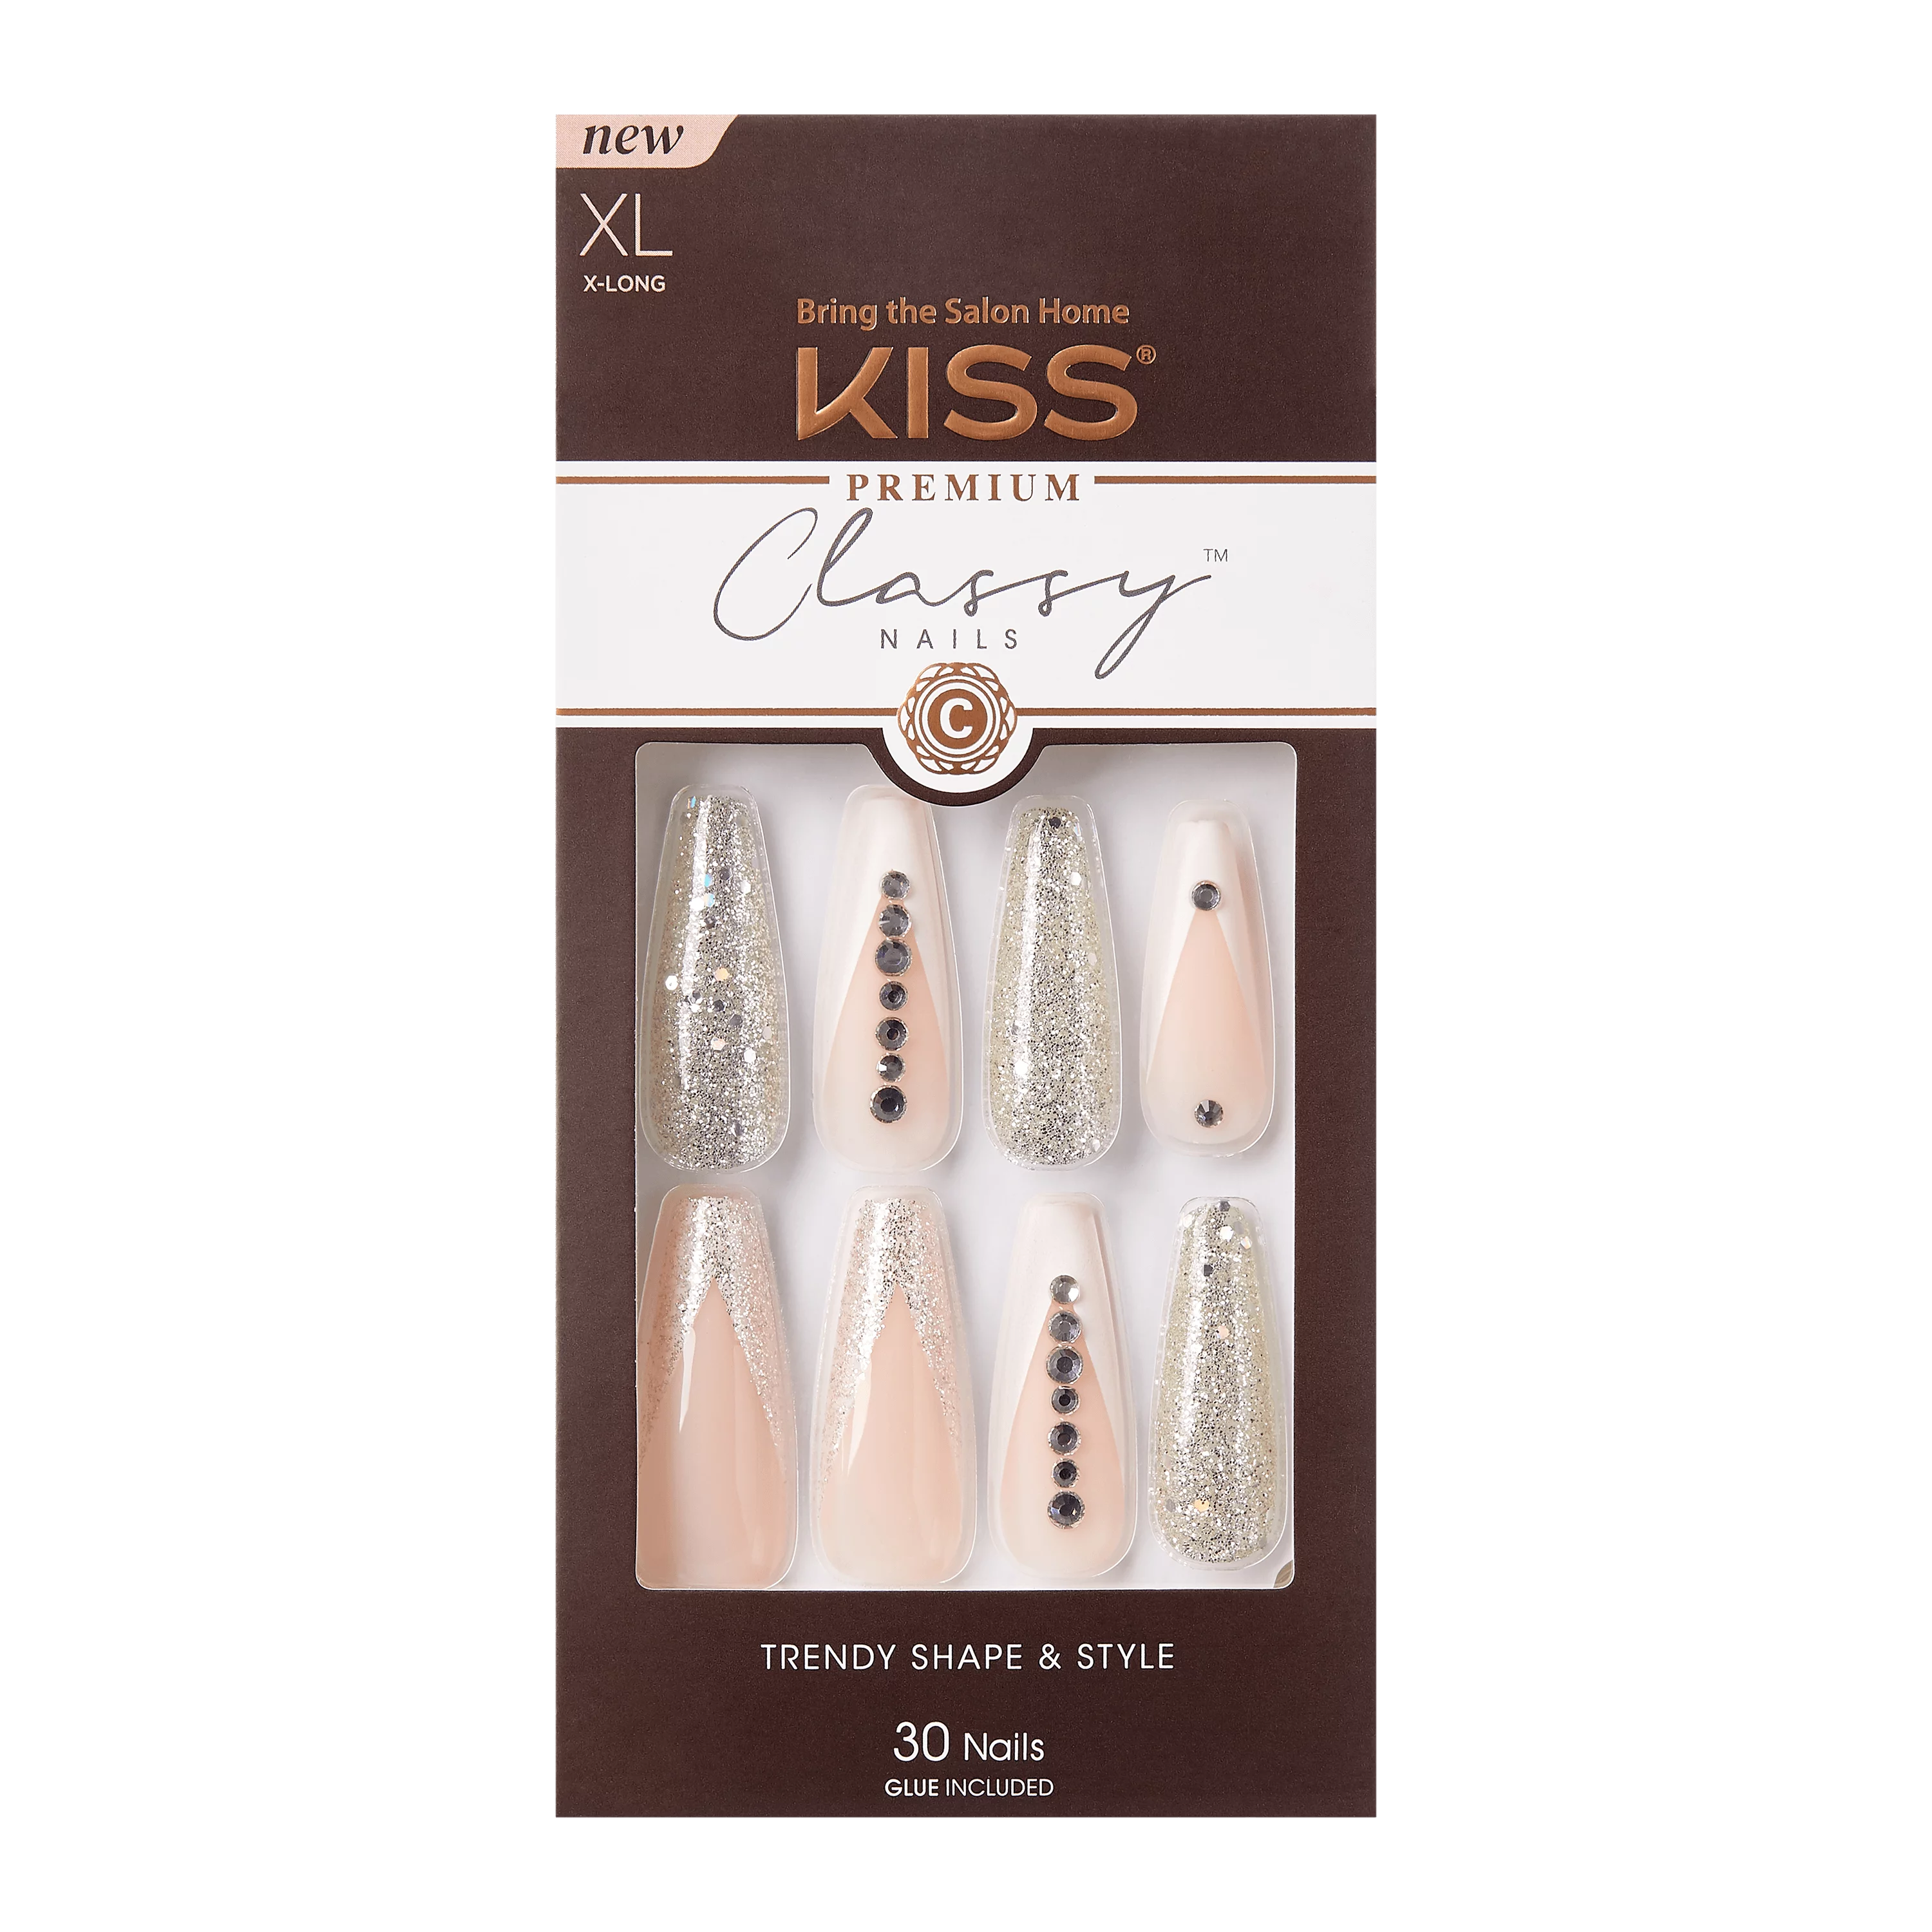 KISS PREMIUM CLASSY NAILS- 30 NAILS WITH GEL INCLUDED- XL